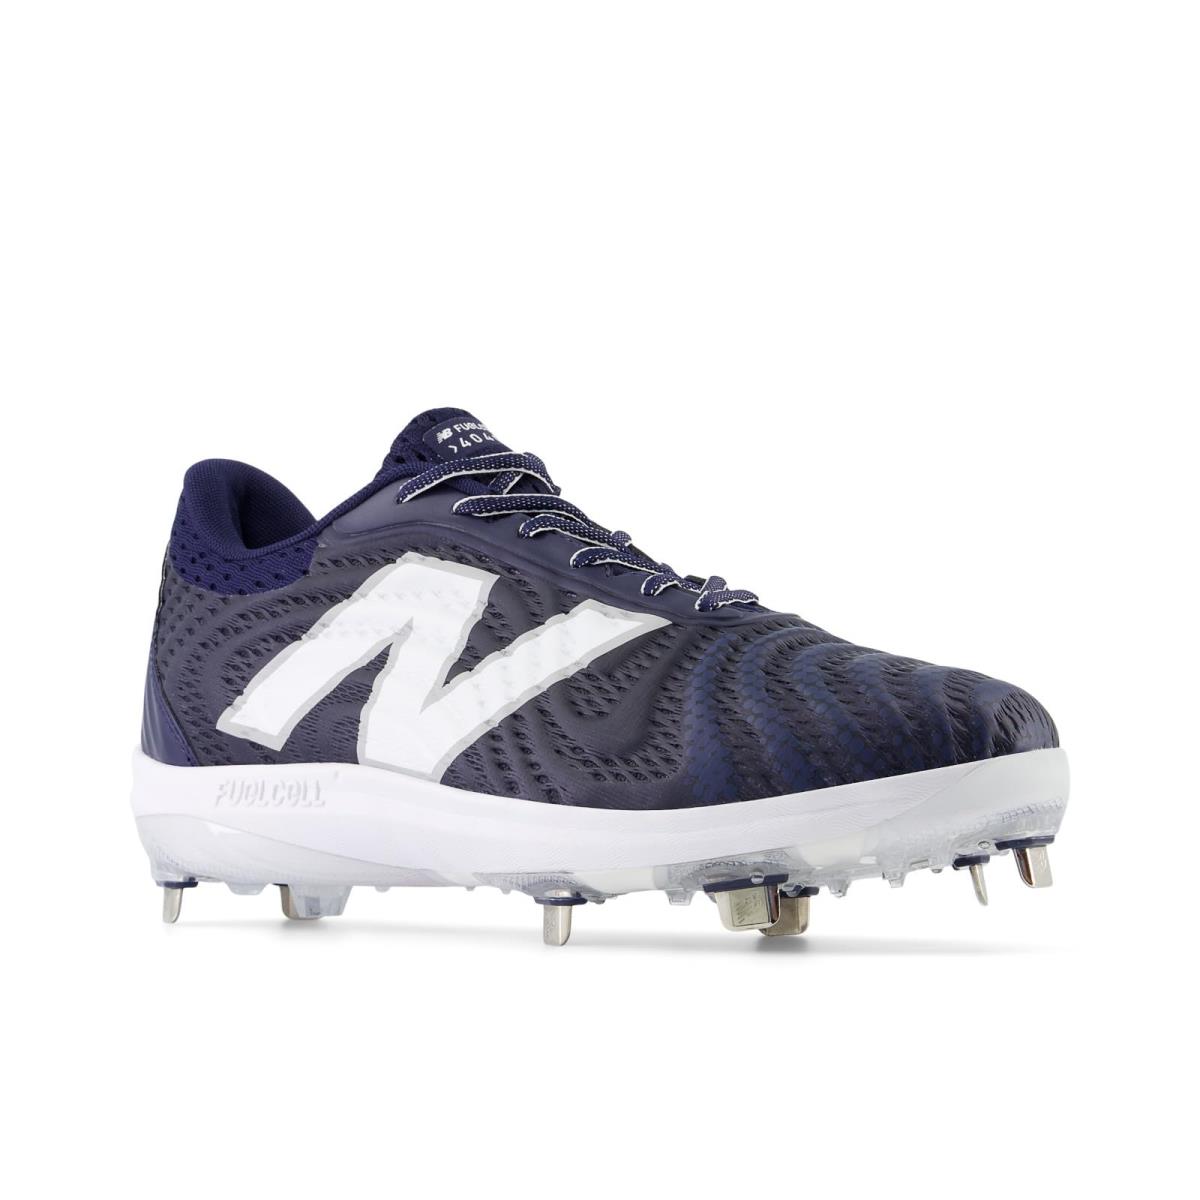 Man`s Sneakers Athletic Shoes New Balance Fuelcell 4040 v7 Metal Team Navy/Optic White